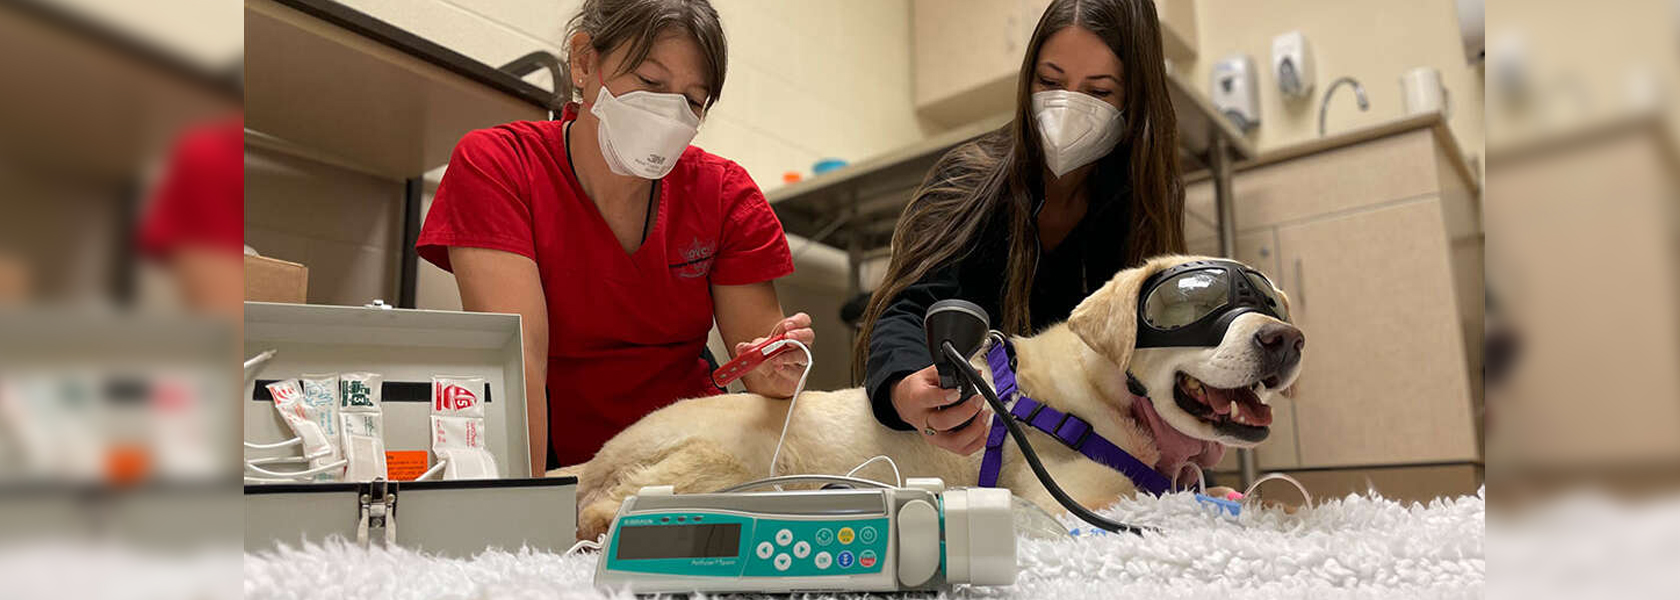 A yellow lab wearing 'doggles' to protect her eyes from laser therapy lays on the floor as she receives treatment from two veterinarians